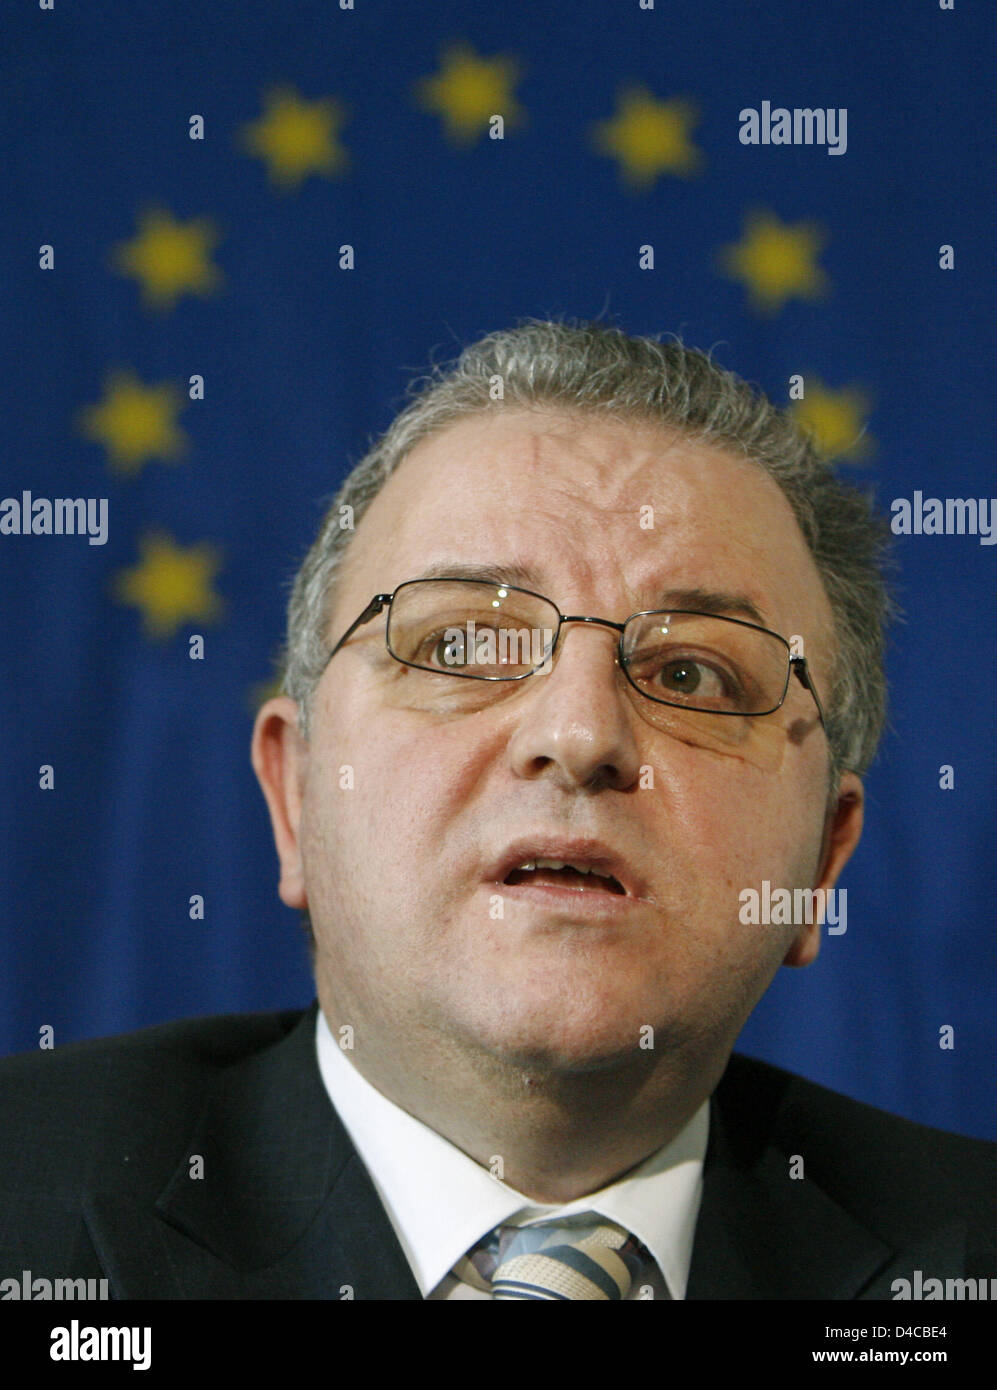 The picture shows Kenan Kolat the chairman of the intrest group Turkish community in Germany (TGD) speaking in front of a European flag at a press conference in Berlin, Germany, 10 January 2007. The TGD appealed to the German President to intervene in the heated debate about crime commited by young people in Germany and to help turn the heated debate into a rational discourse. TGD  Stock Photo